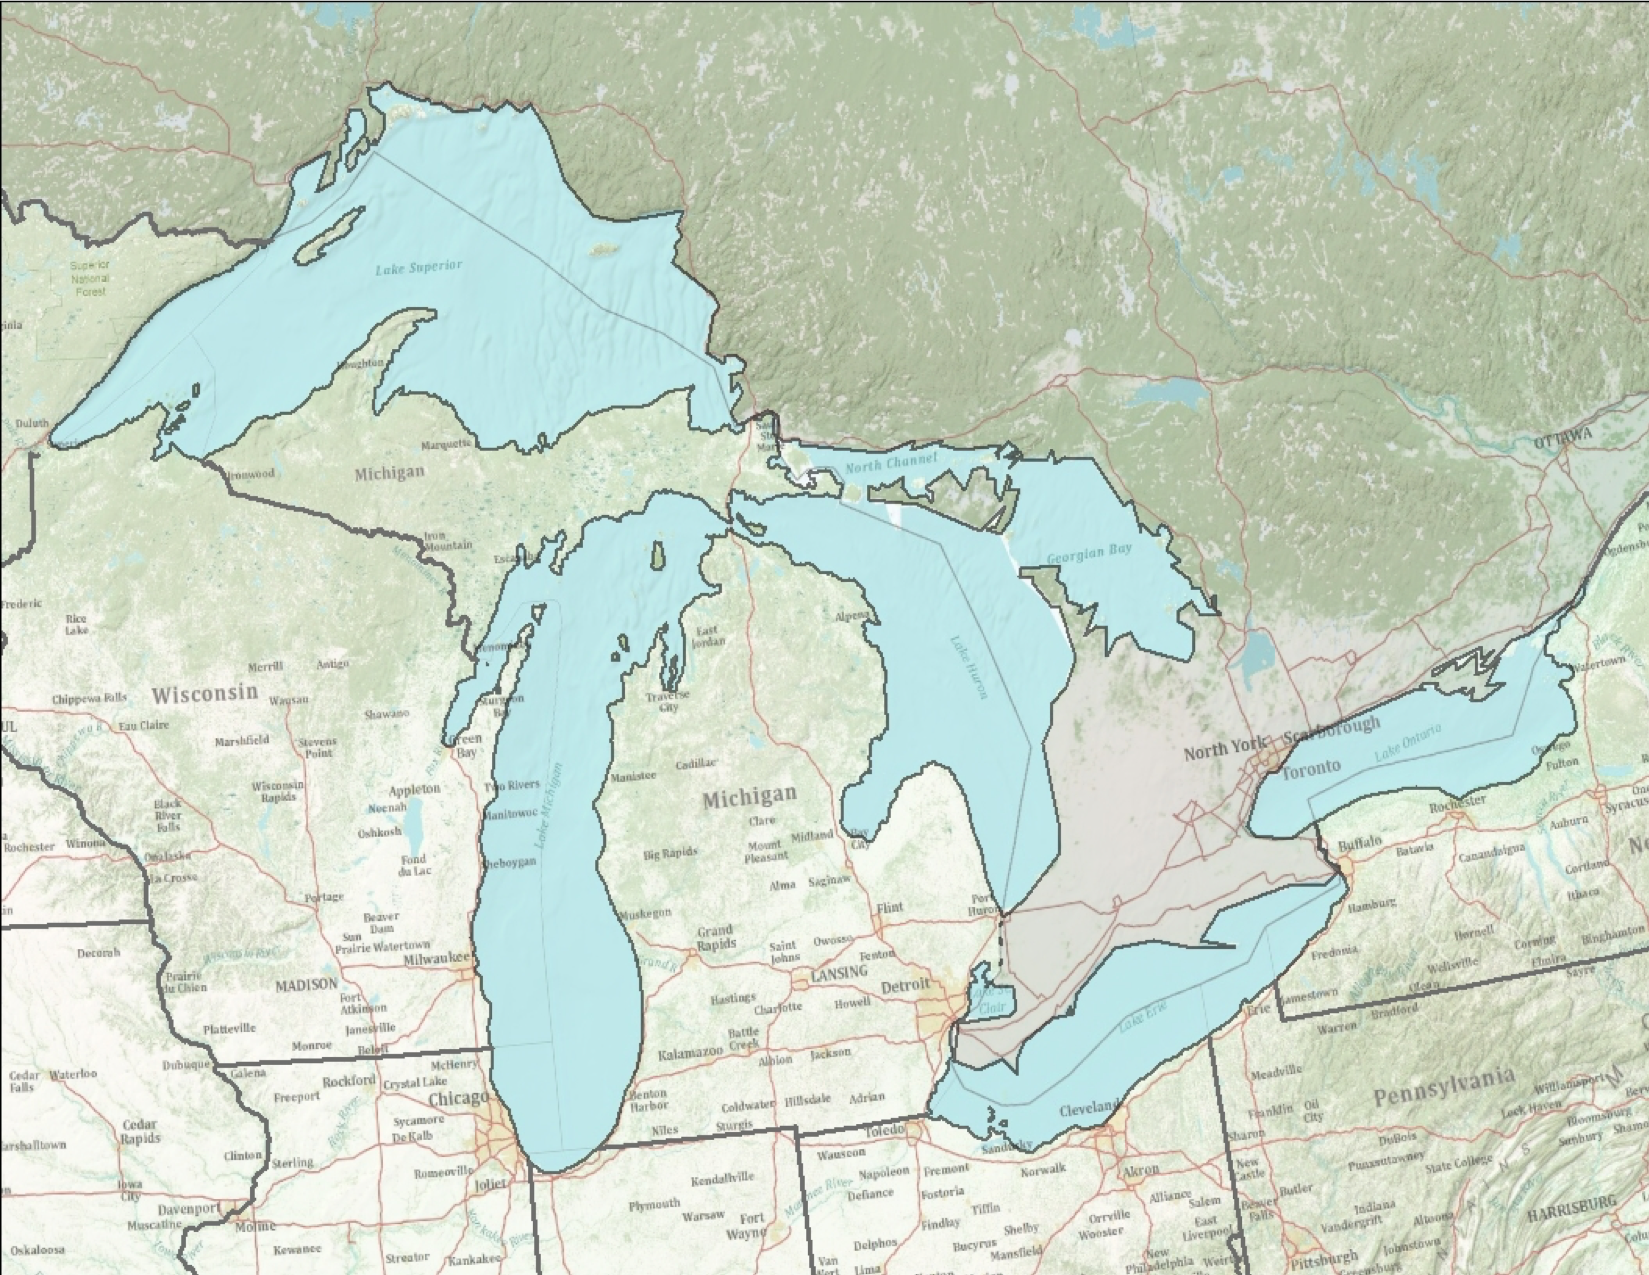 Colonial campingvogn fordomme The Great Lakes - ArcGIS StoryMaps